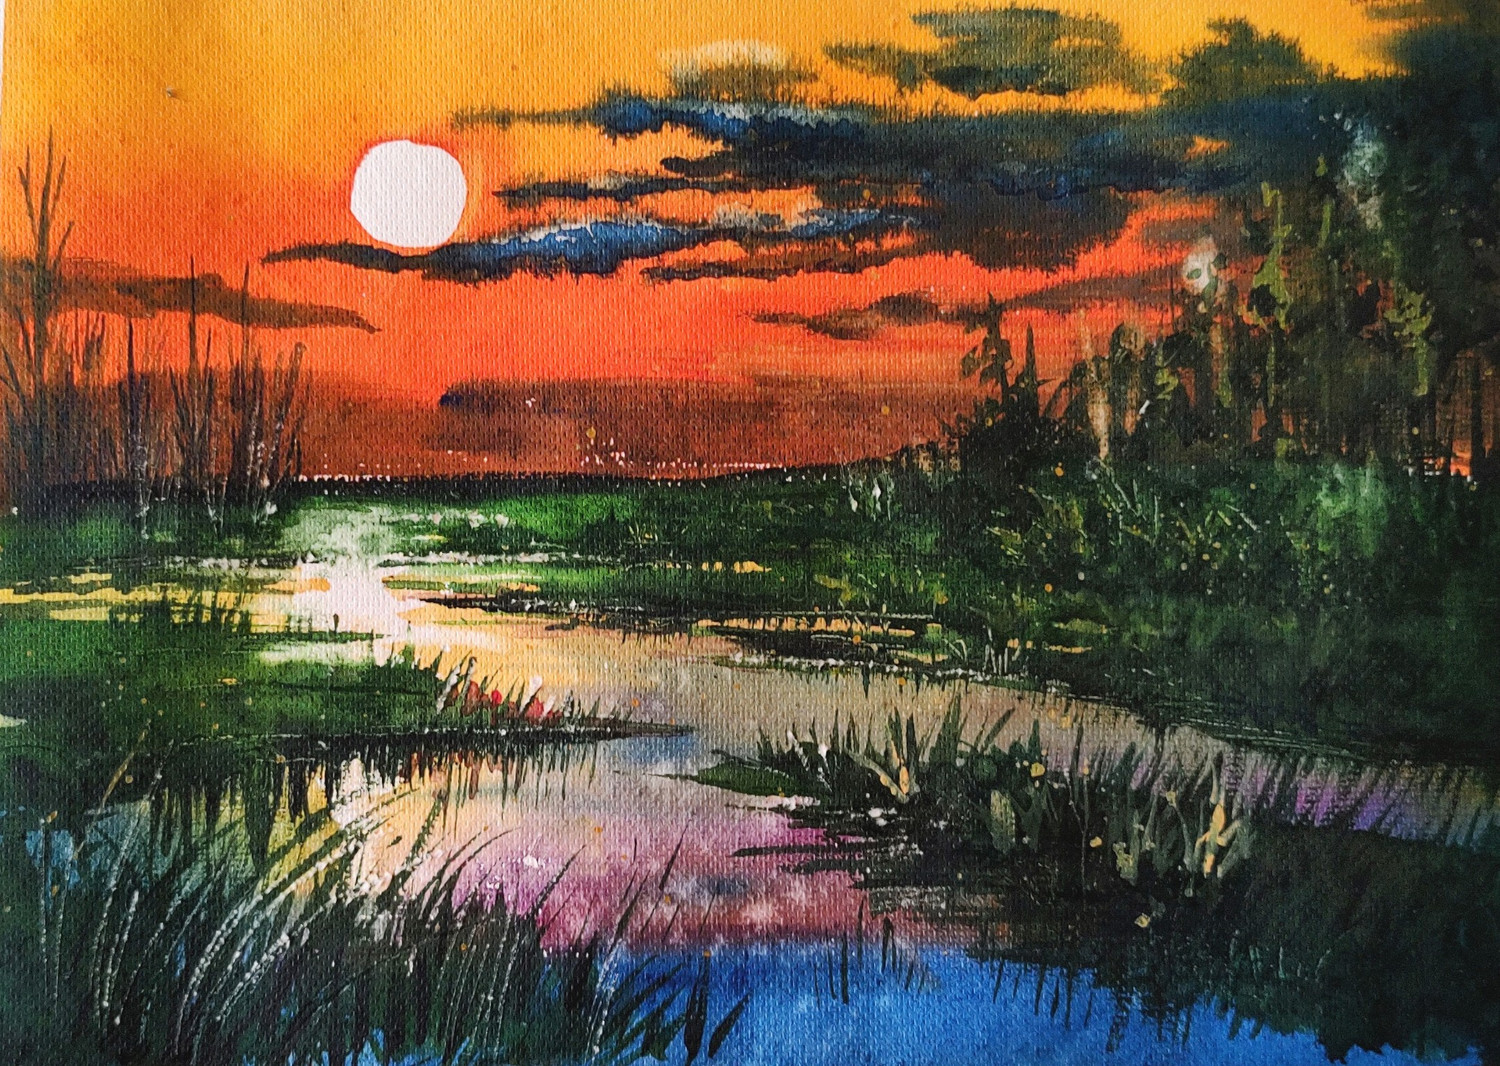 Drawing Using Oil Pastel – My Drawing Course